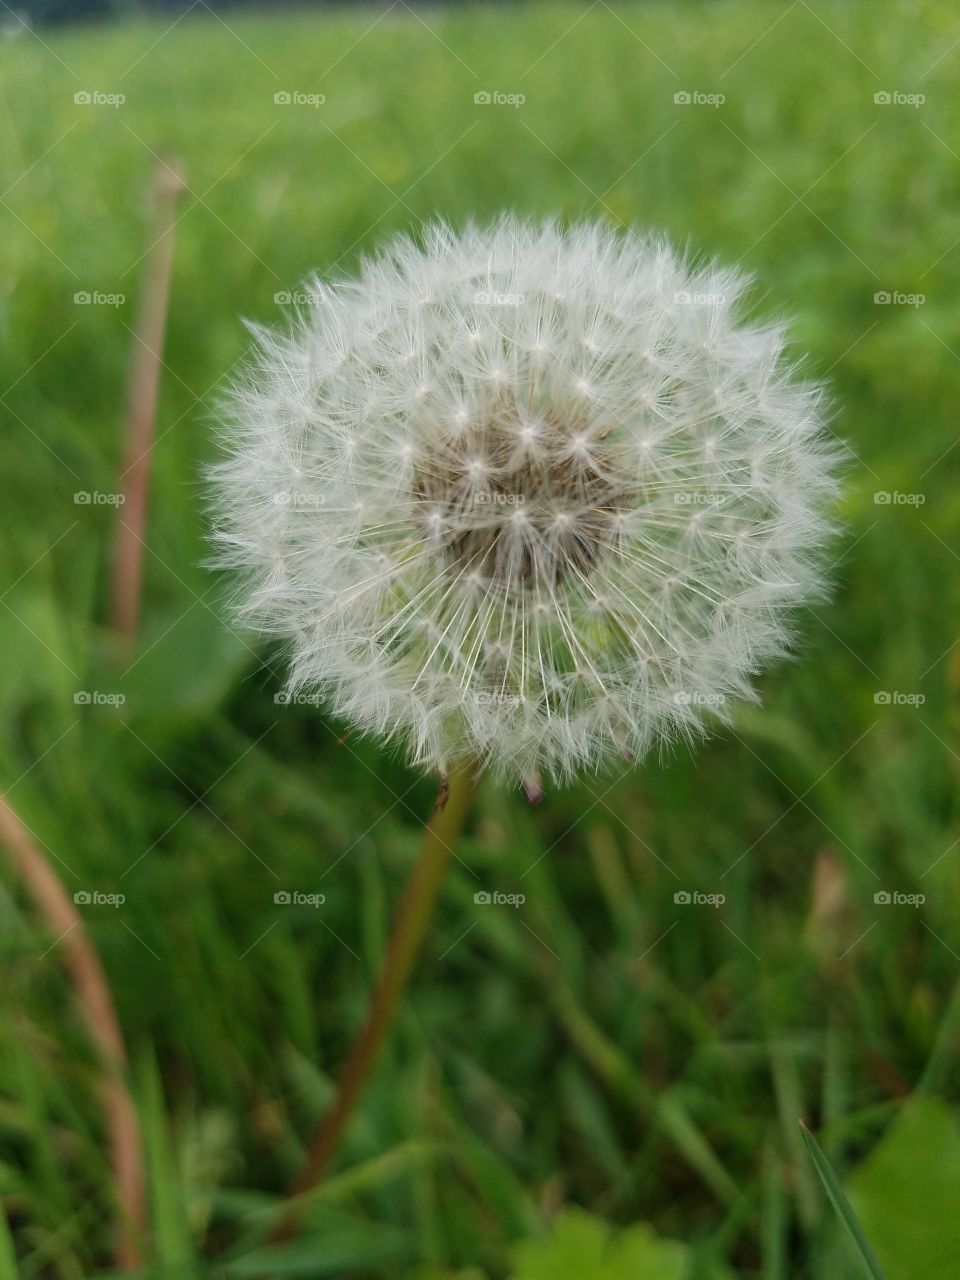 dandelion seeds known as Make-a-Wish the original Foundation